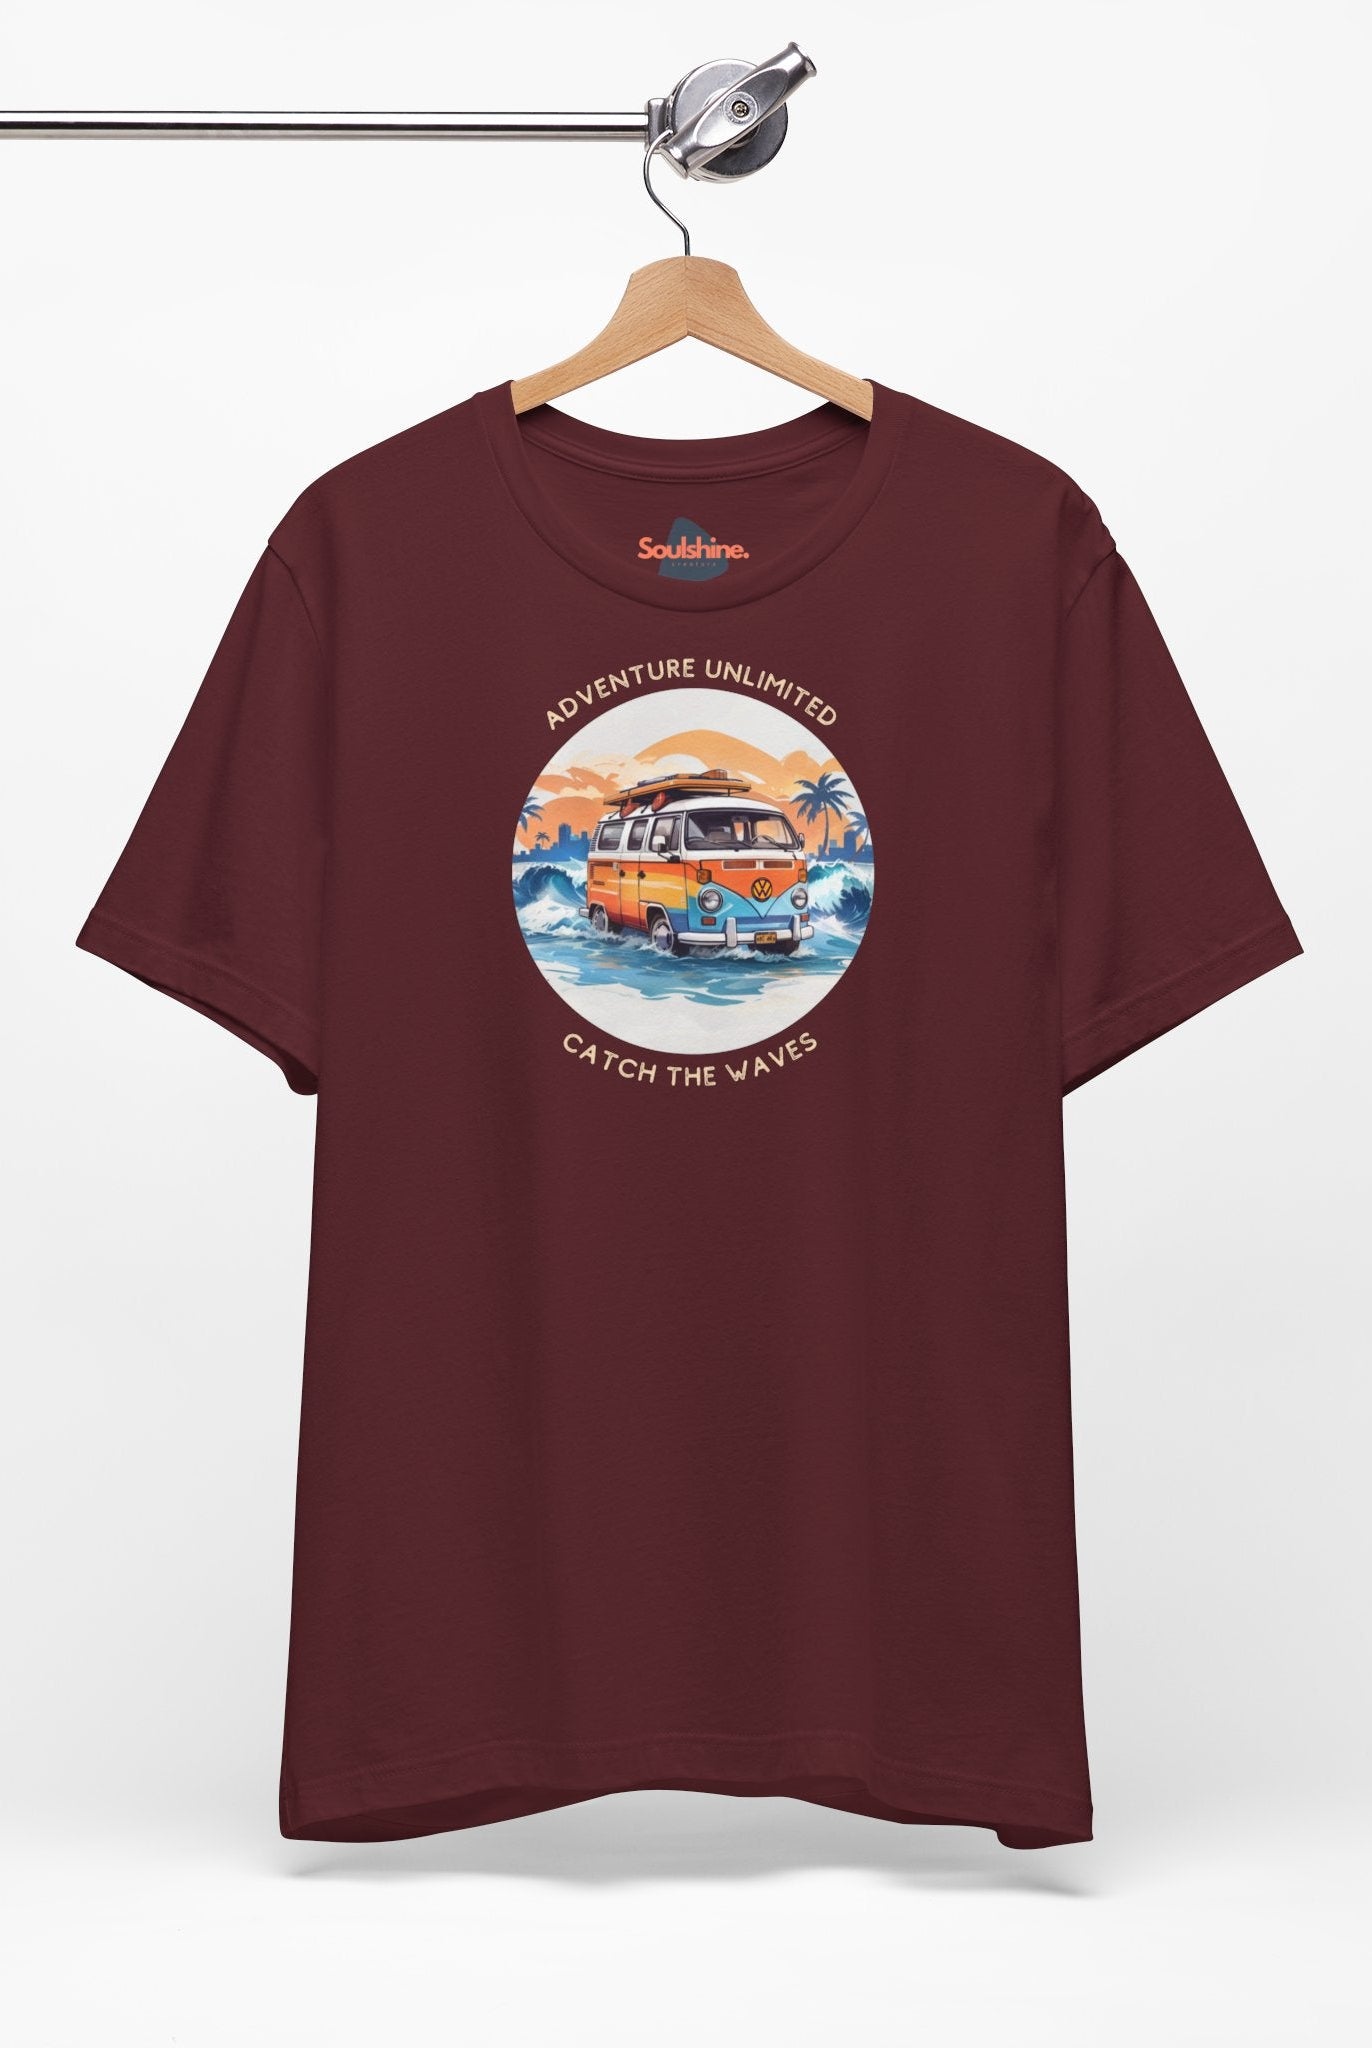 Adventure Unlimited - Surfing T-Shirt featuring ’on it’ slogan printed - Bella & Canvas EU